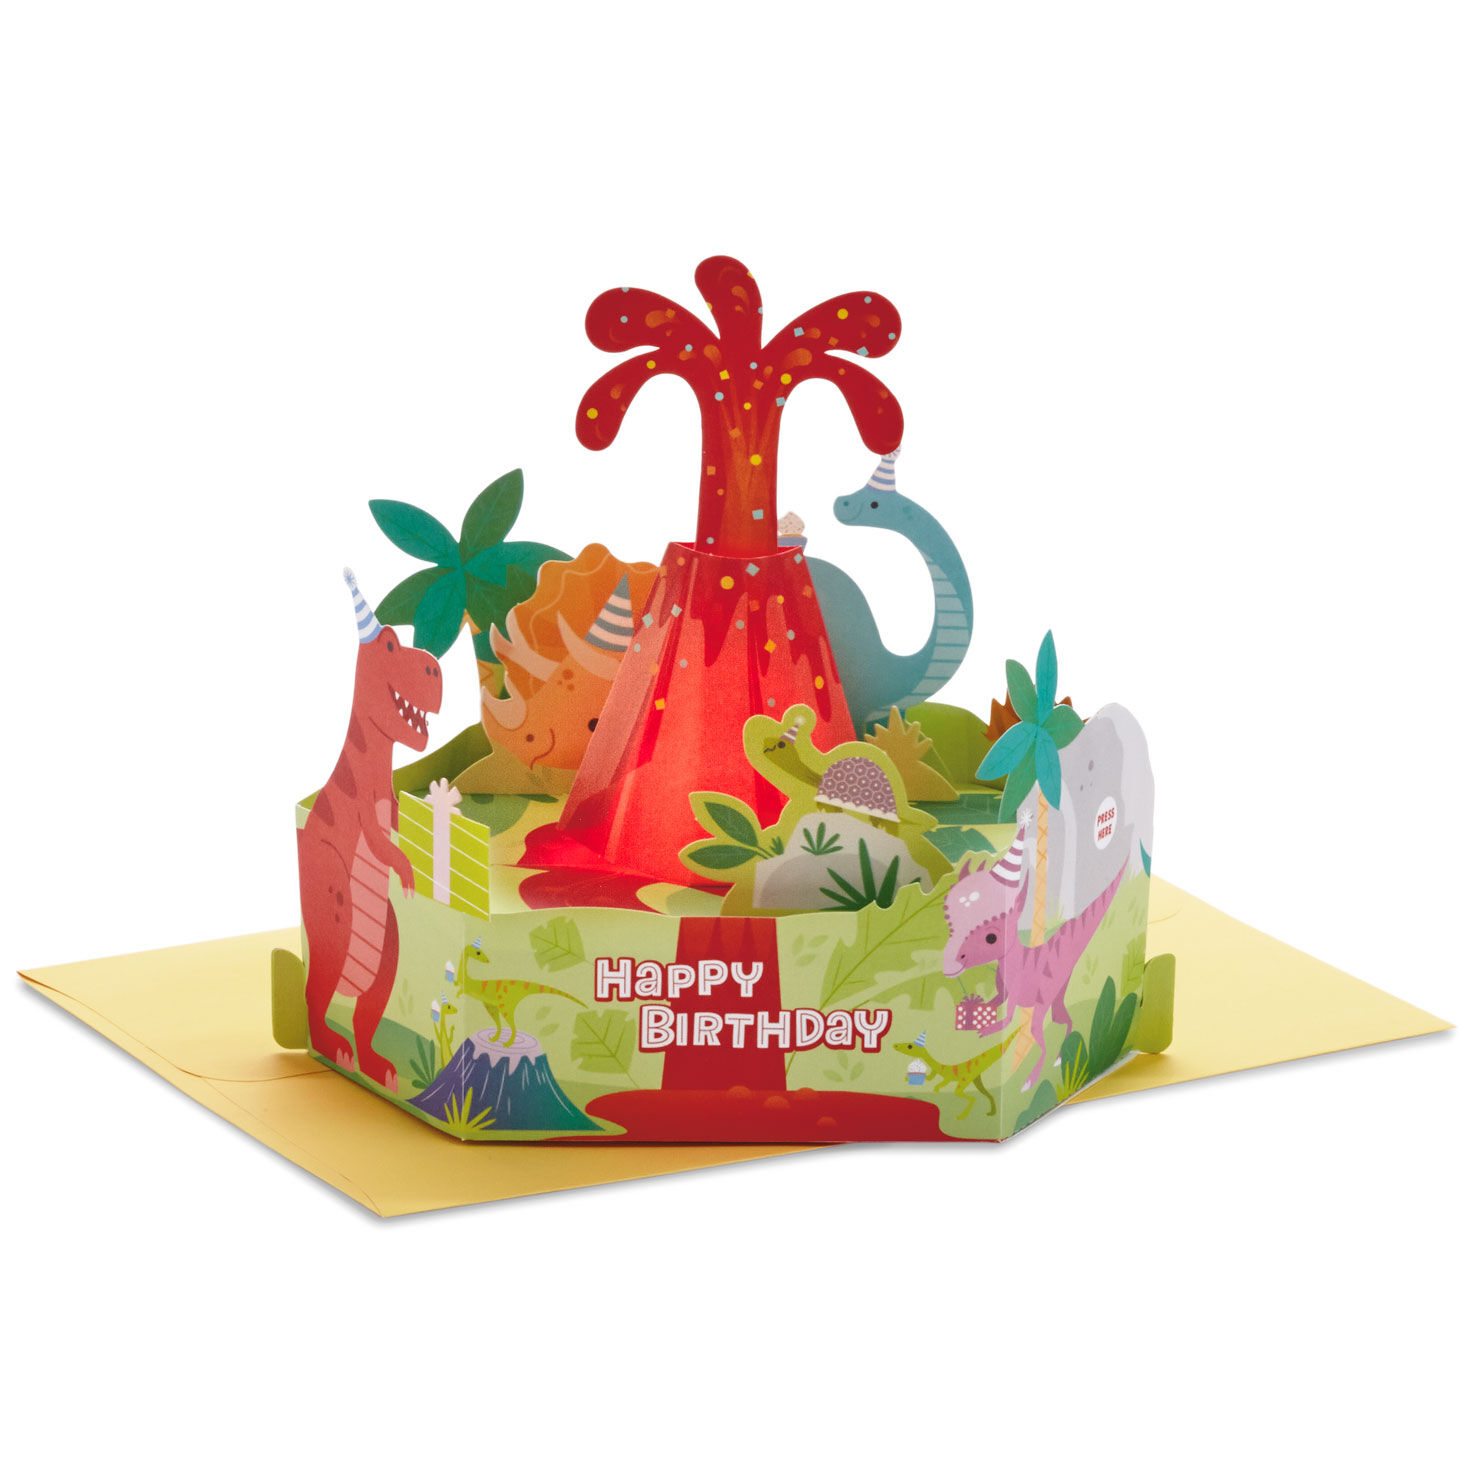 Dinosaurs Musical 3D Pop-Up Birthday Card With Light for only USD 9.99 | Hallmark